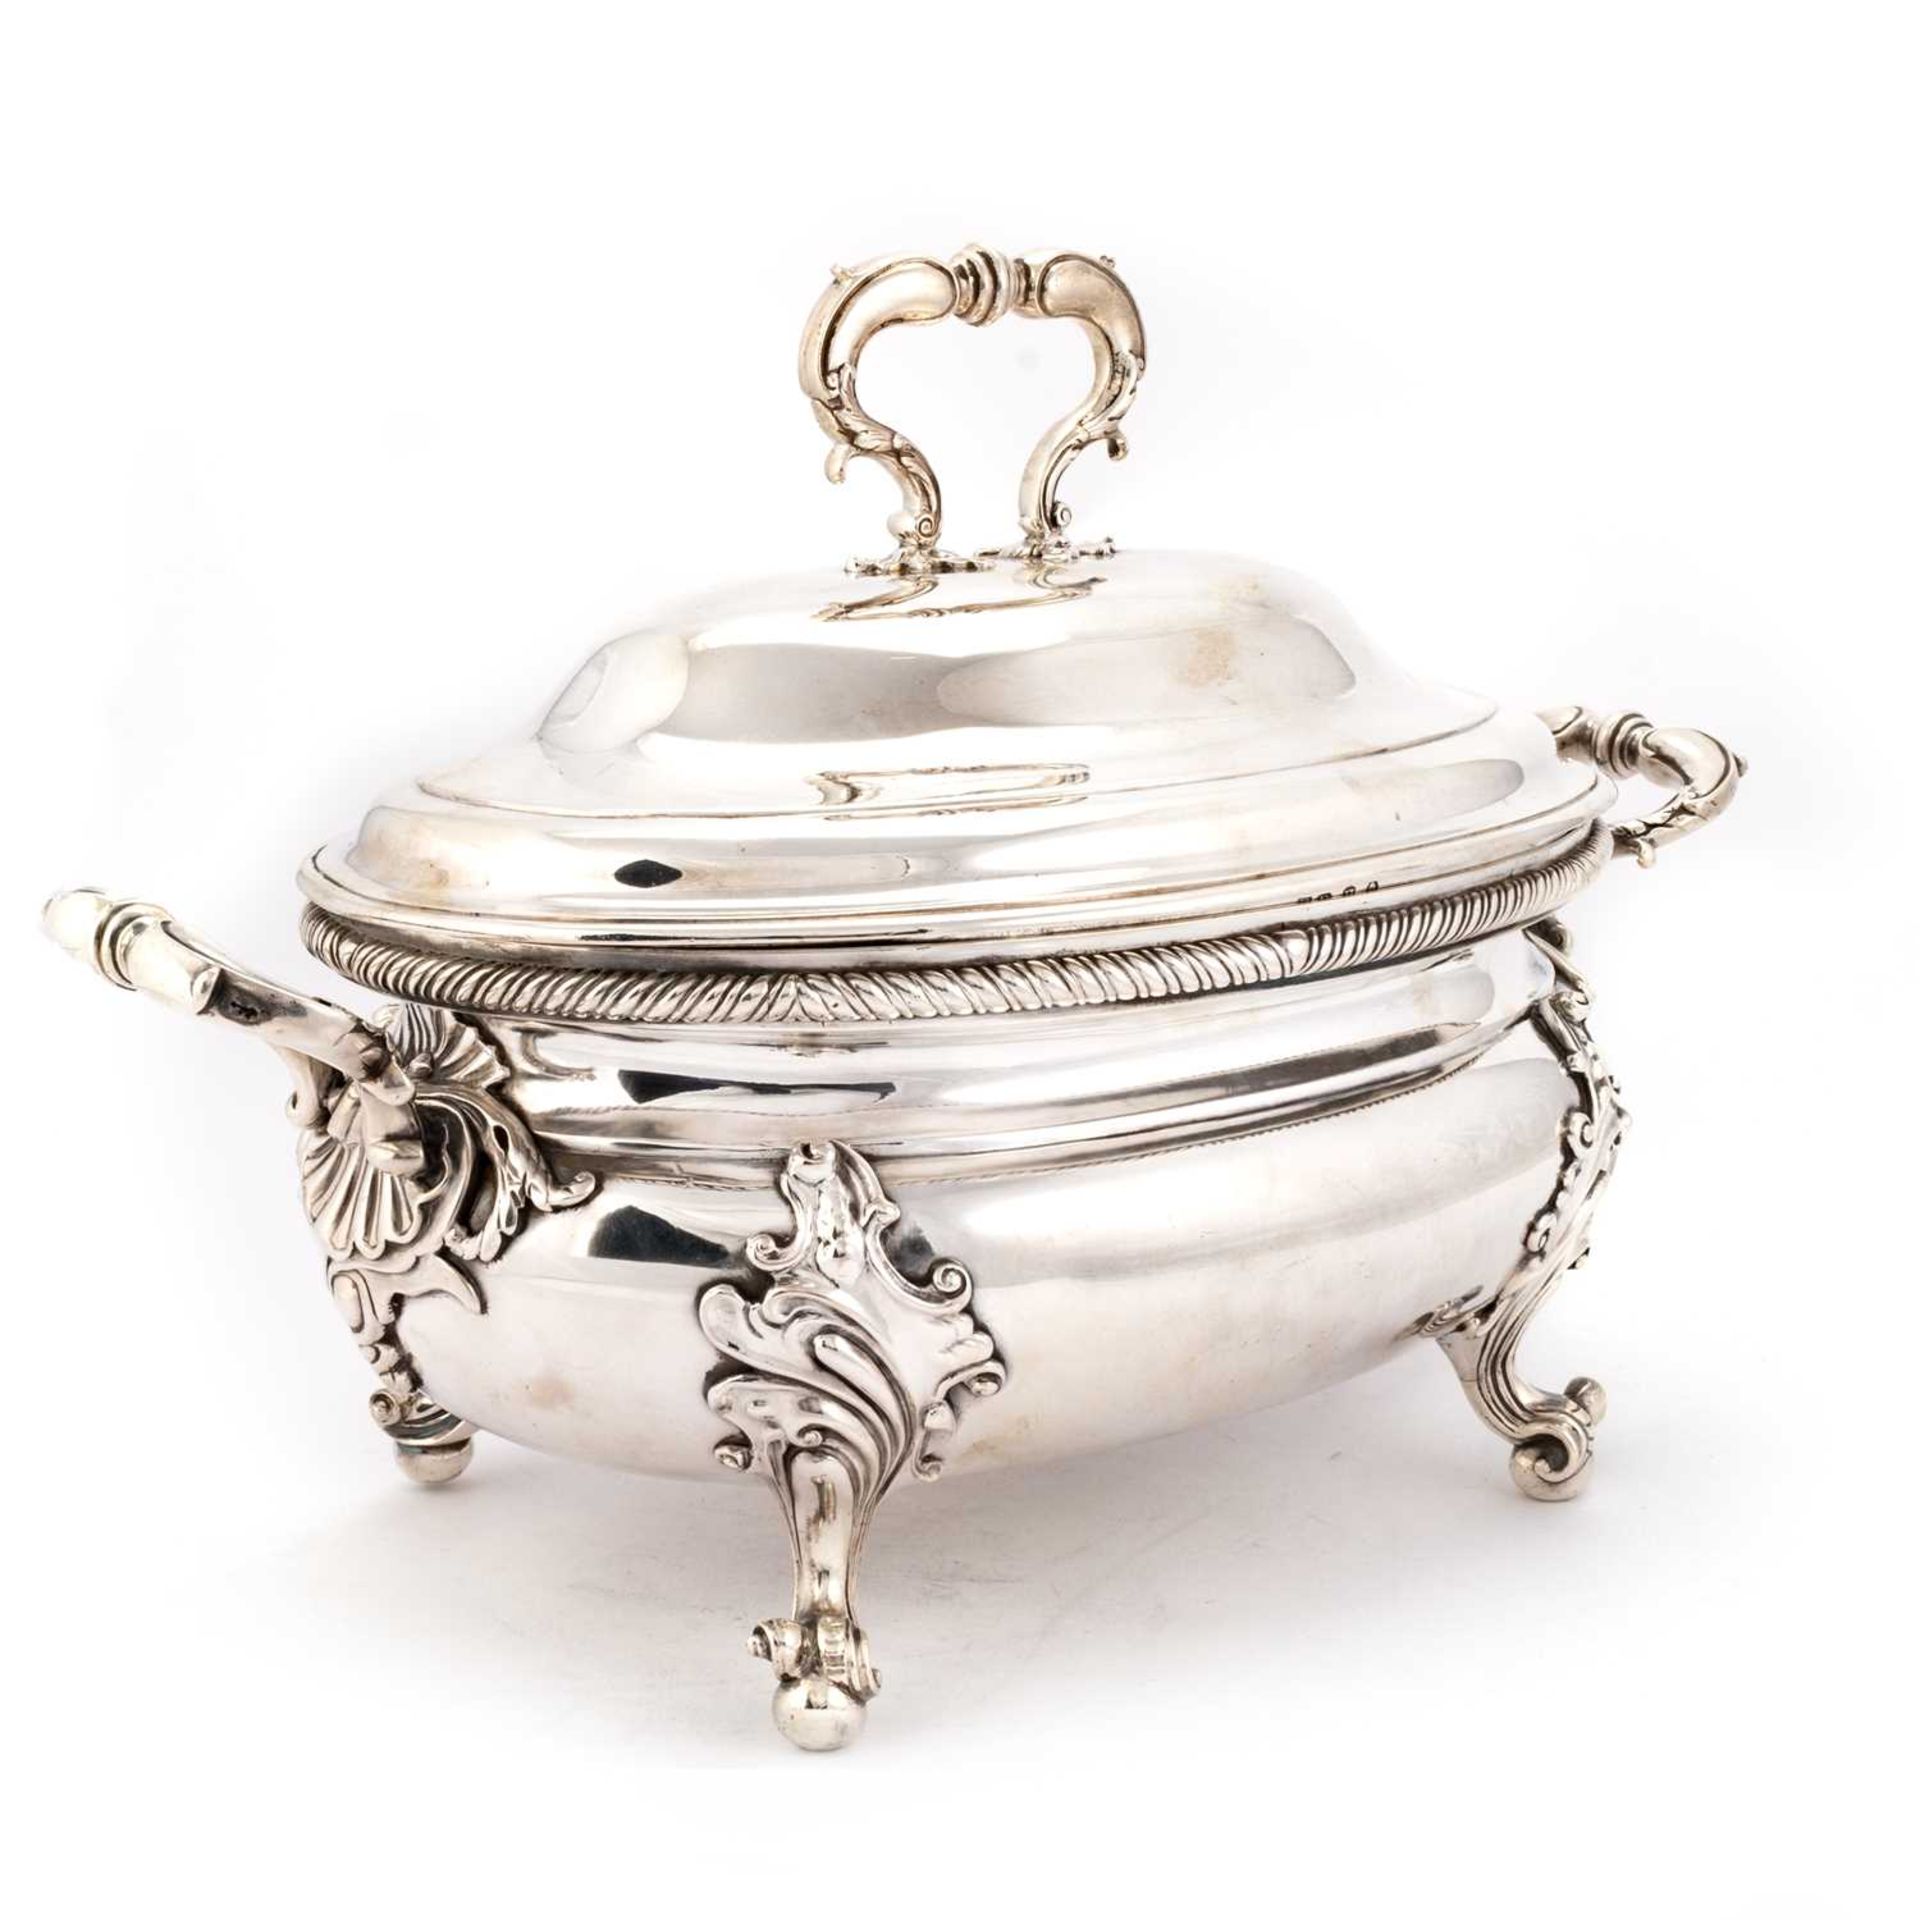 A GEORGE III SILVER SOUP TUREEN - Image 2 of 7